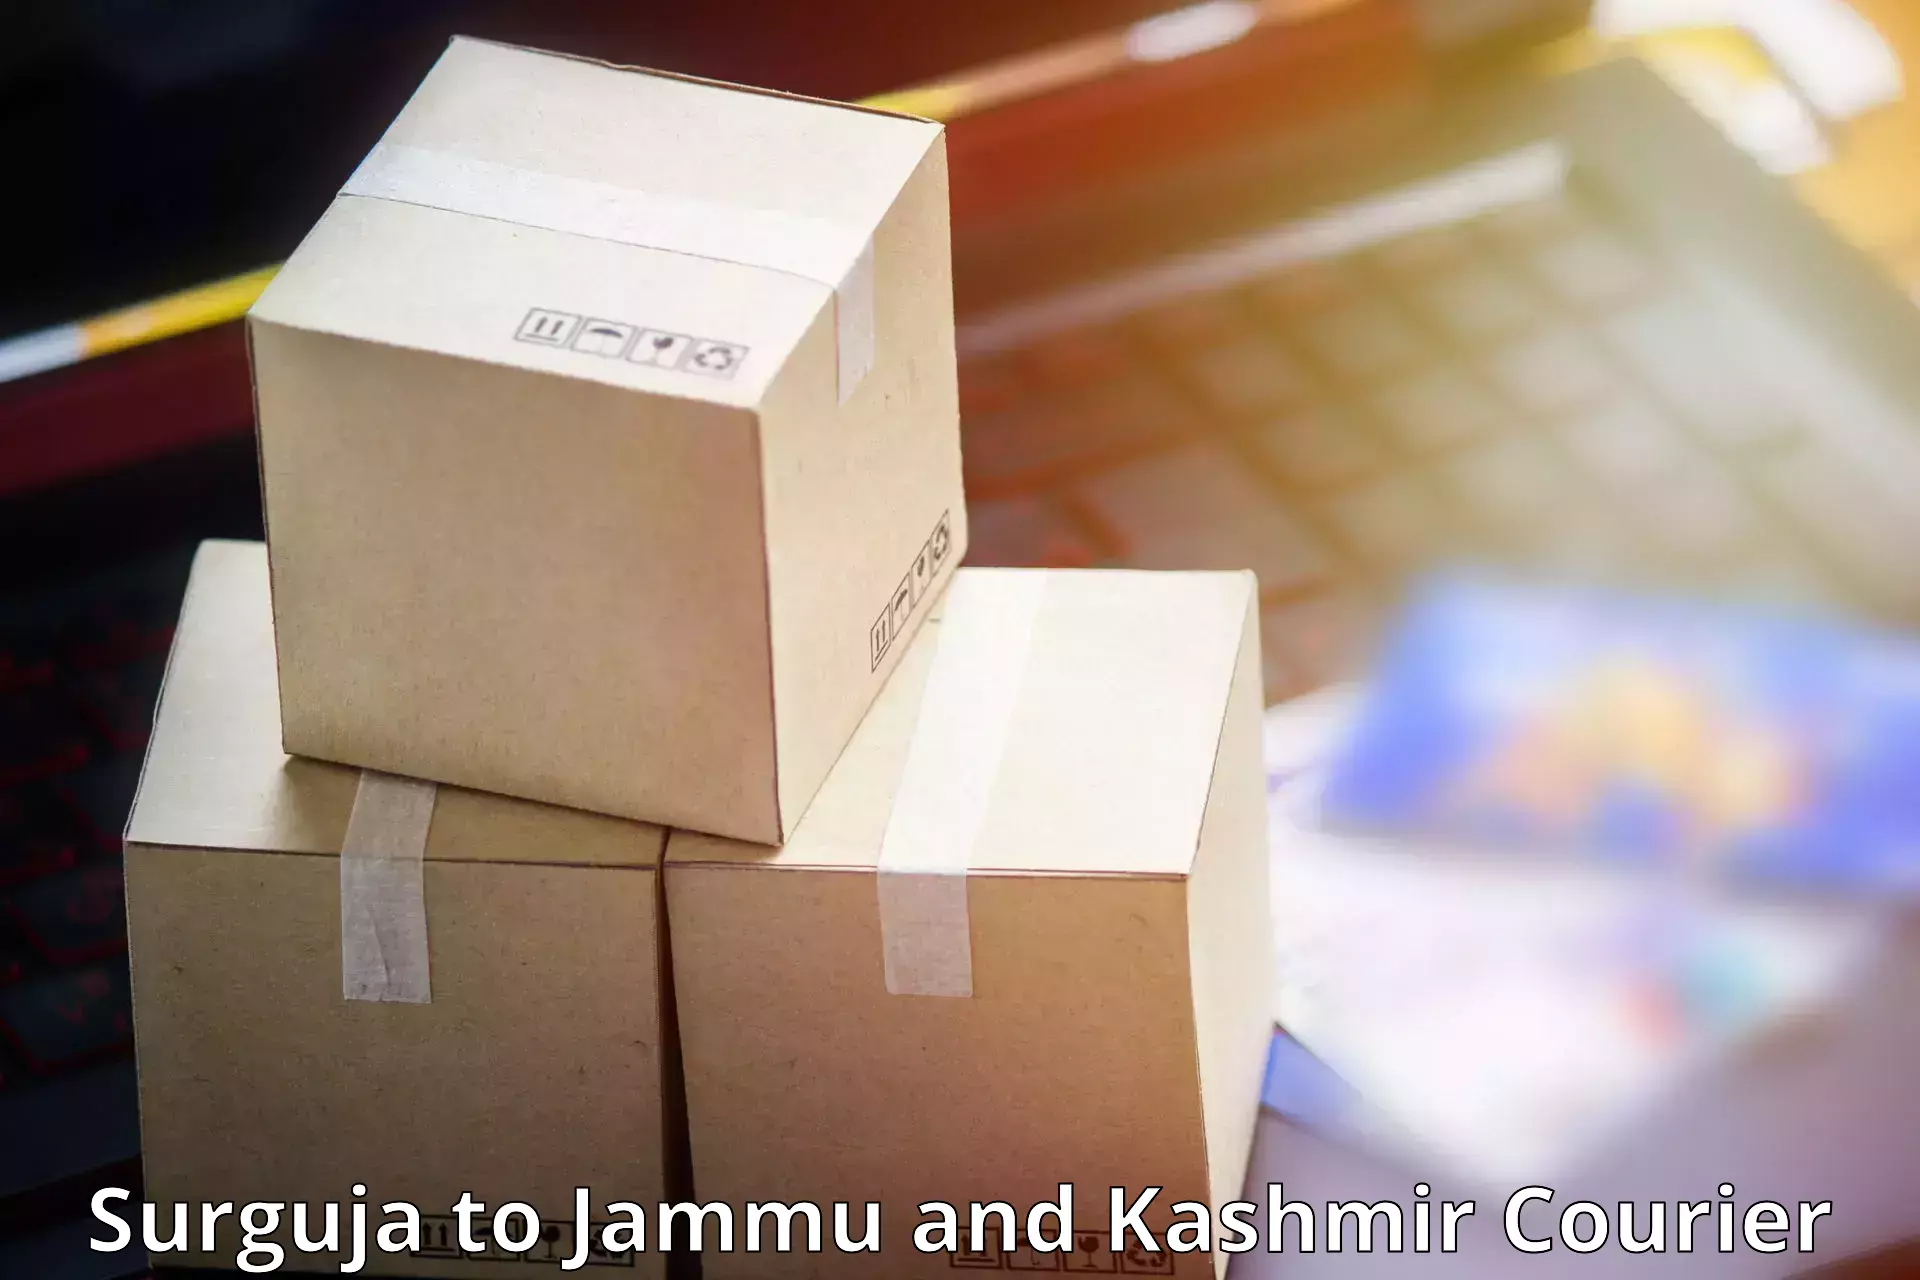 Cargo delivery service Surguja to Ramban